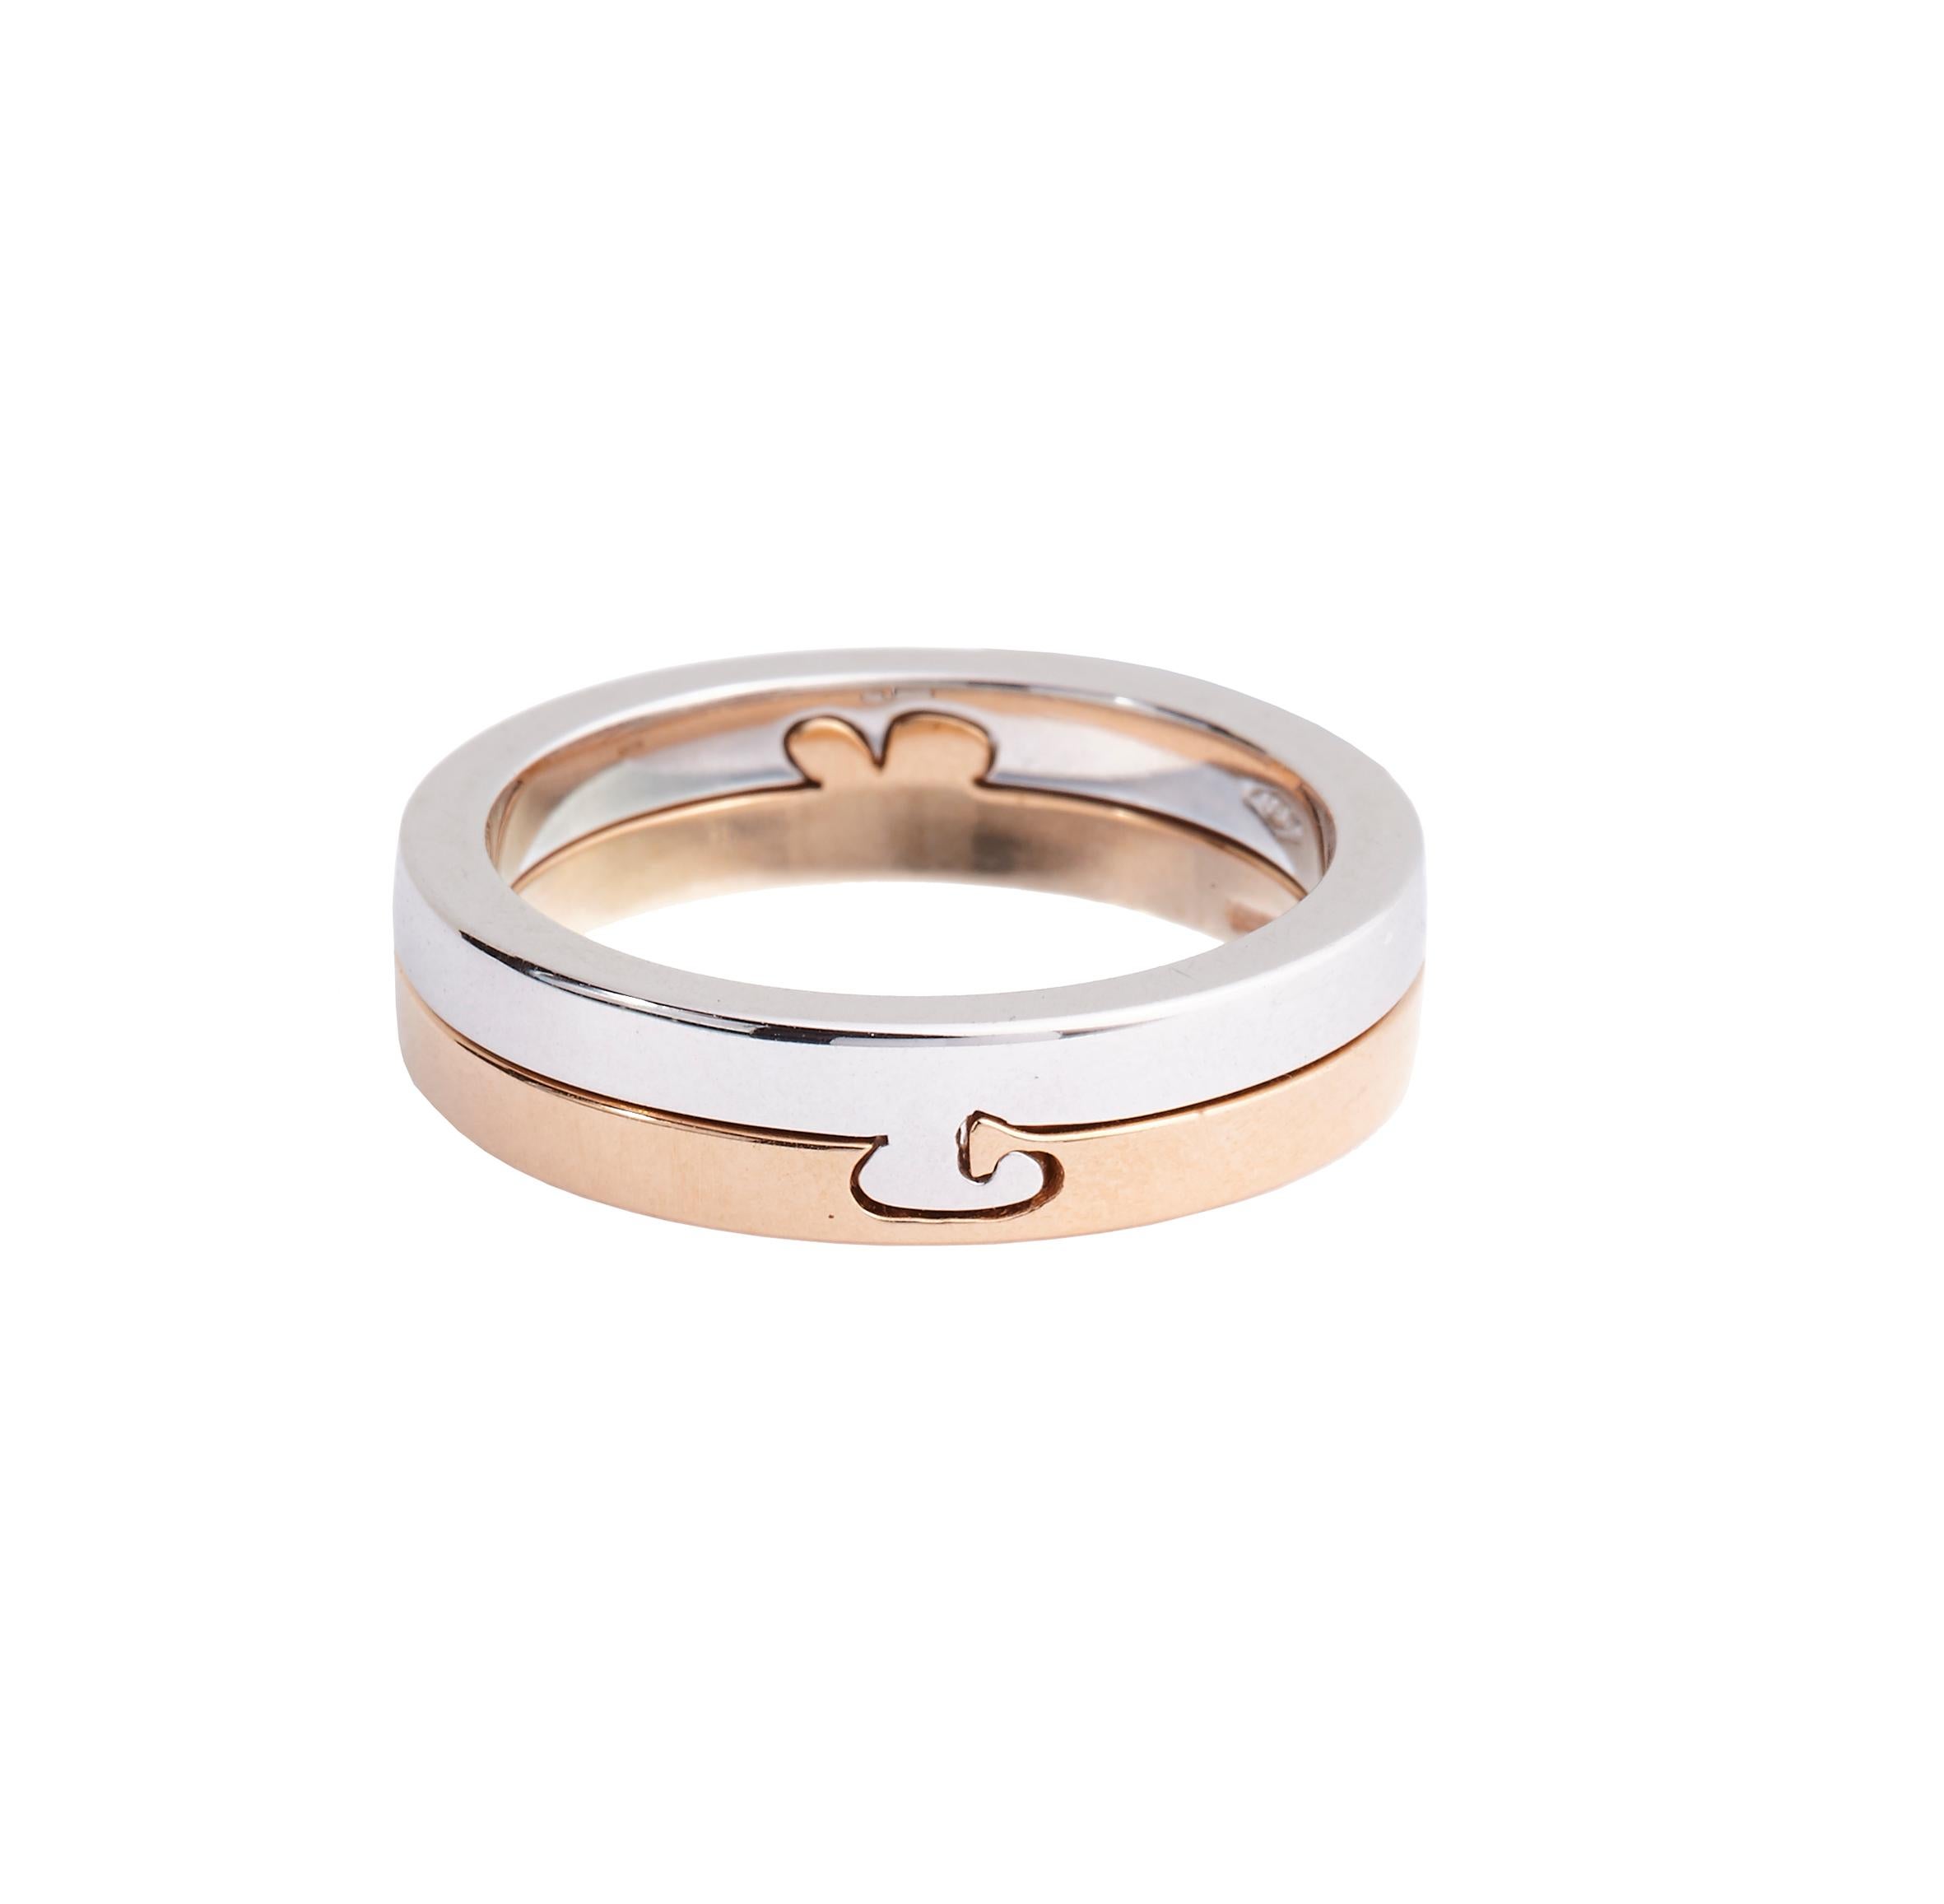 Bespoke 18k Gold Wedding Ring with Interlocking Initials Design
The “Incastro d' Amore” interlocking wedding ring is made of 18 karat white and rose gold. I created it for my husband and I,  since 